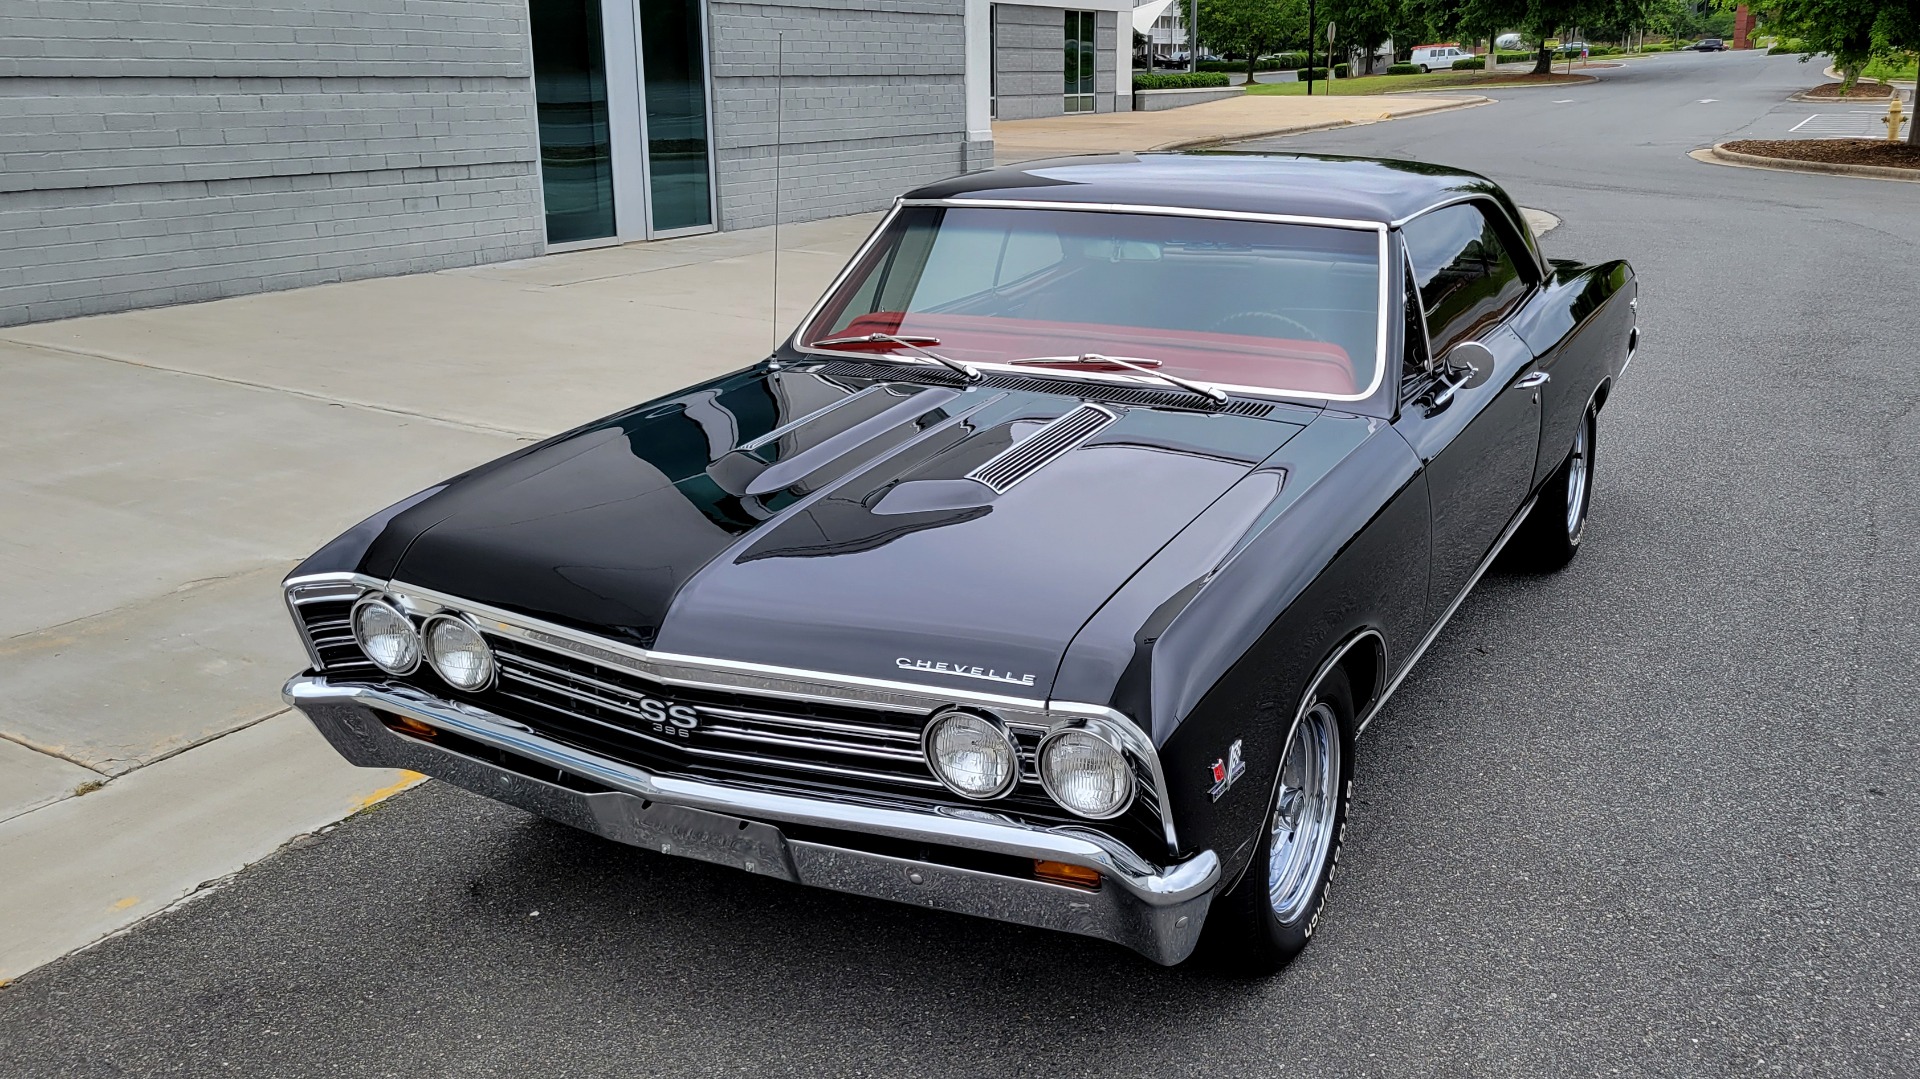 Used 1967 Chevrolet CHEVELLE SS 369 / HARD-TOP / 4-SPEED / ICE COLD AIR / POWER STEERING / RESTOERD for sale $70,000 at Formula Imports in Charlotte NC 28227 3